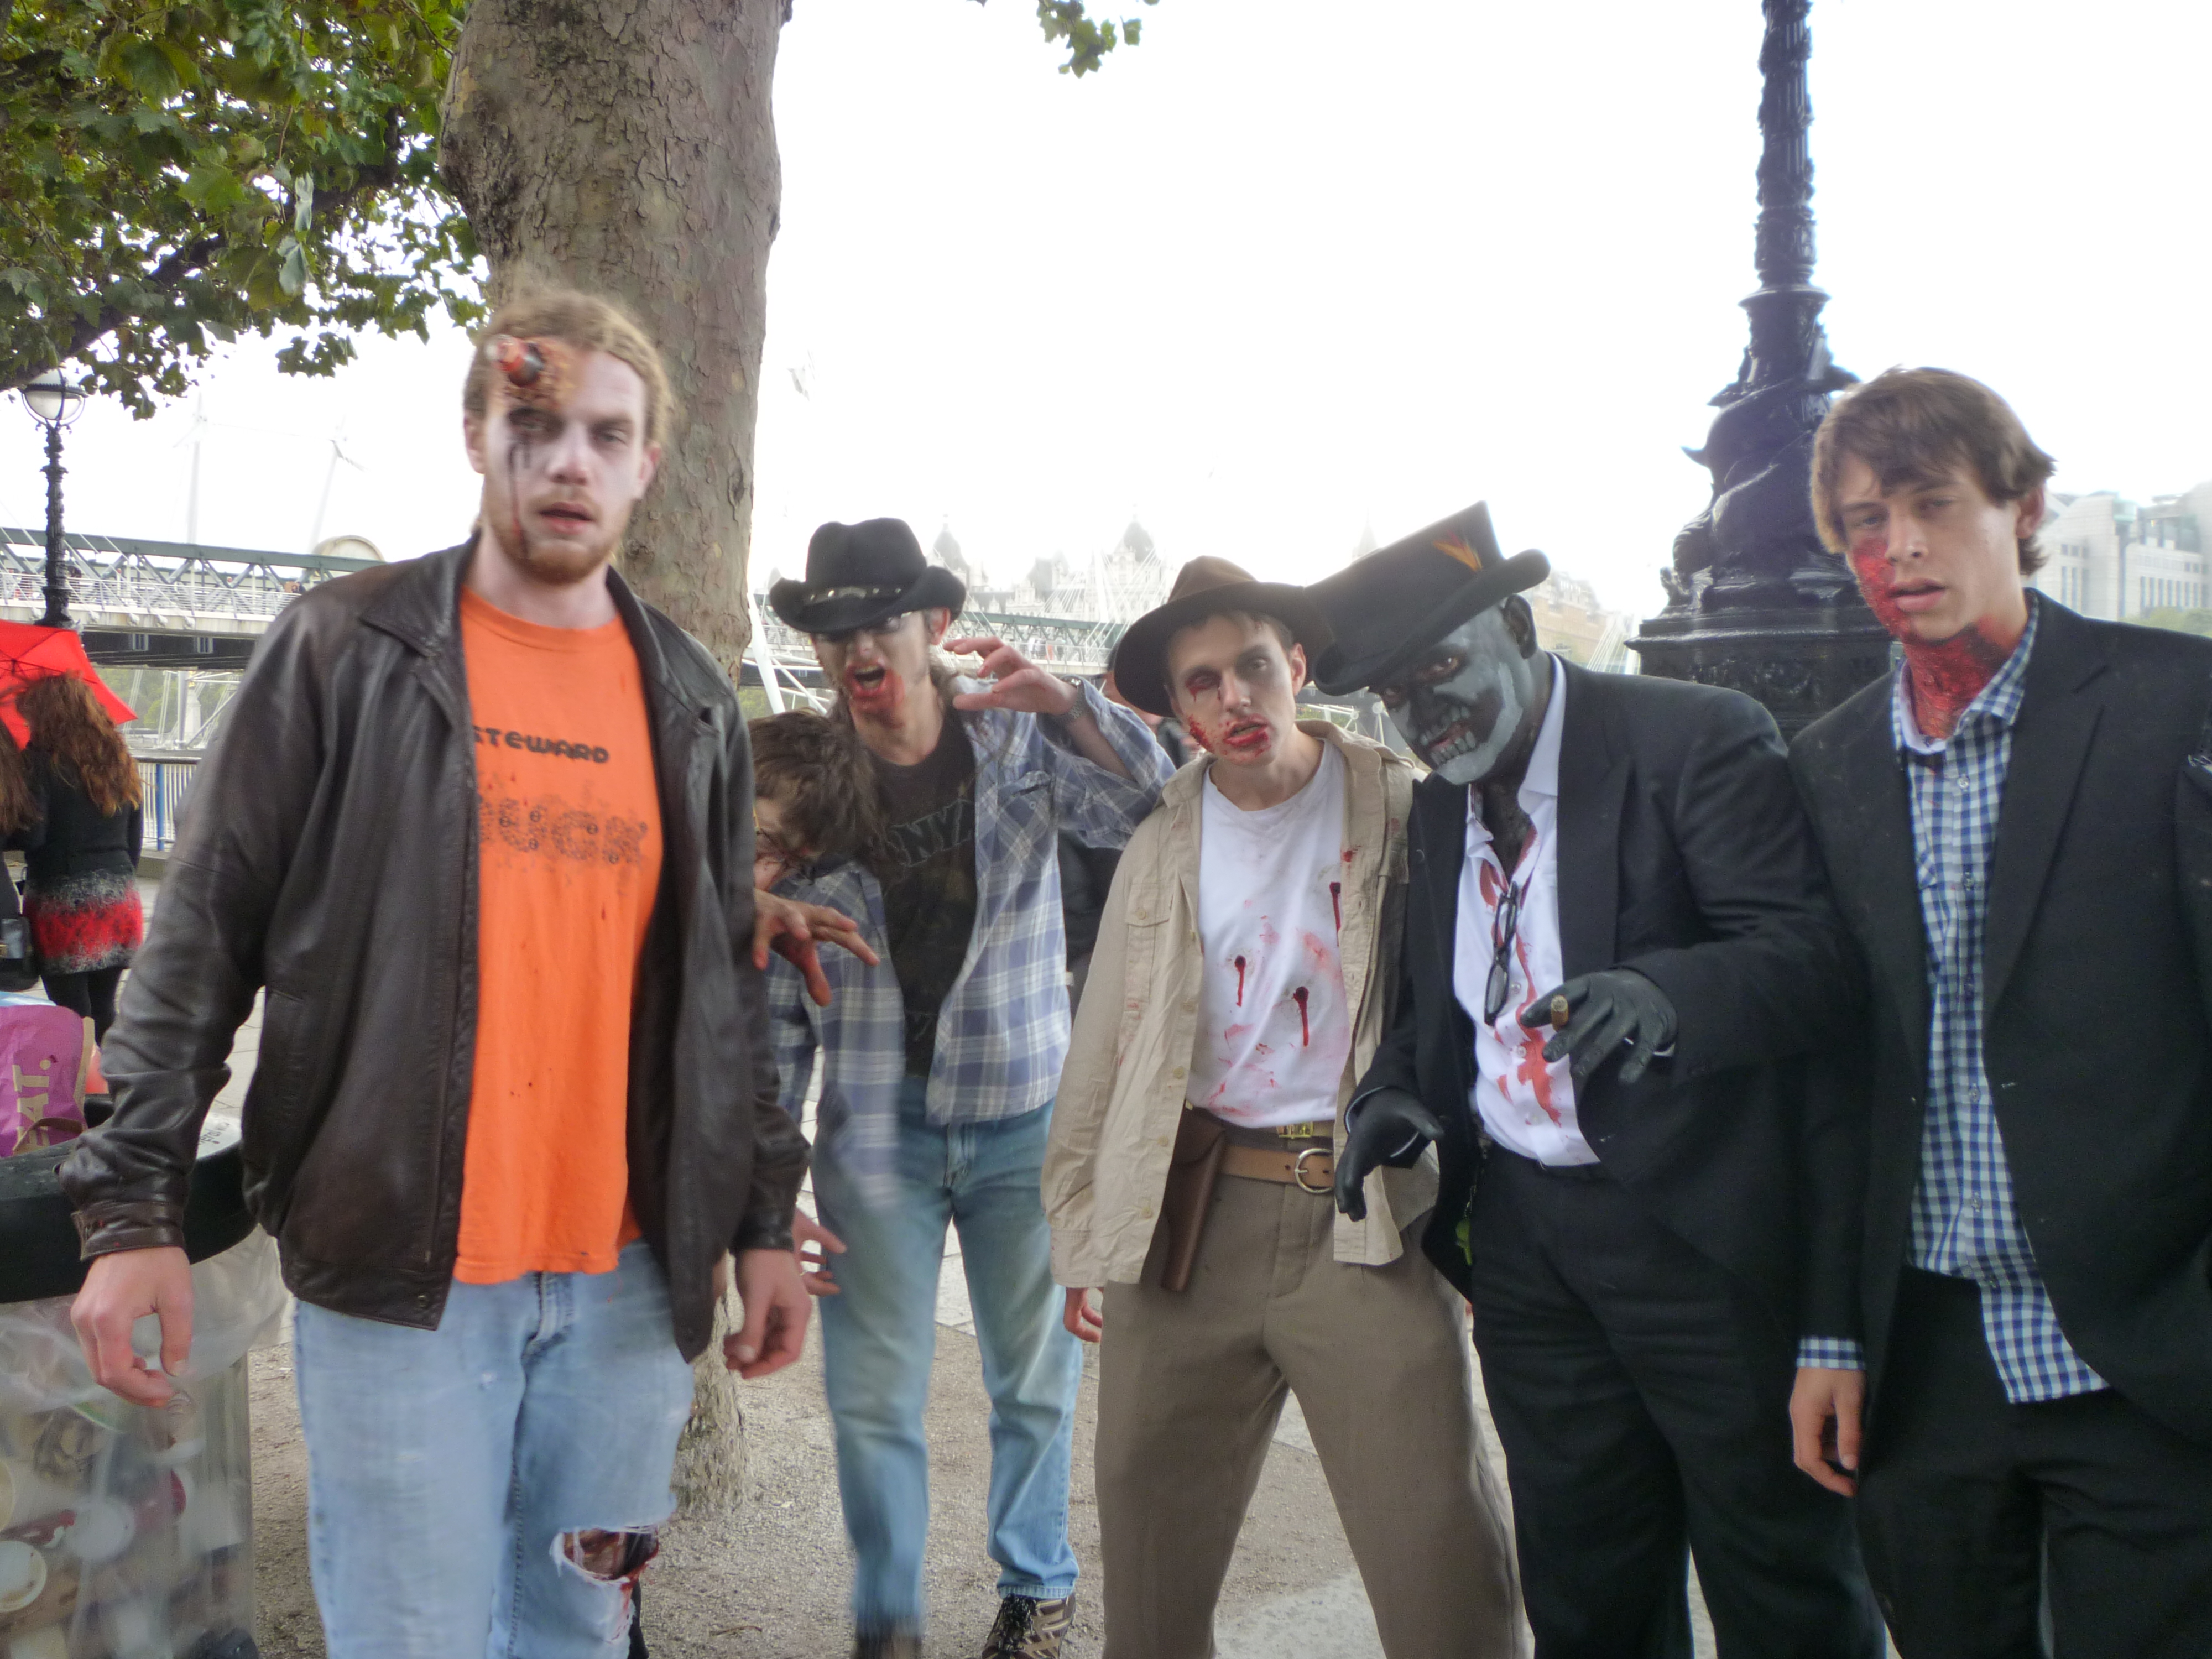 World Zombie Day in London - check the glass on the guy´s head